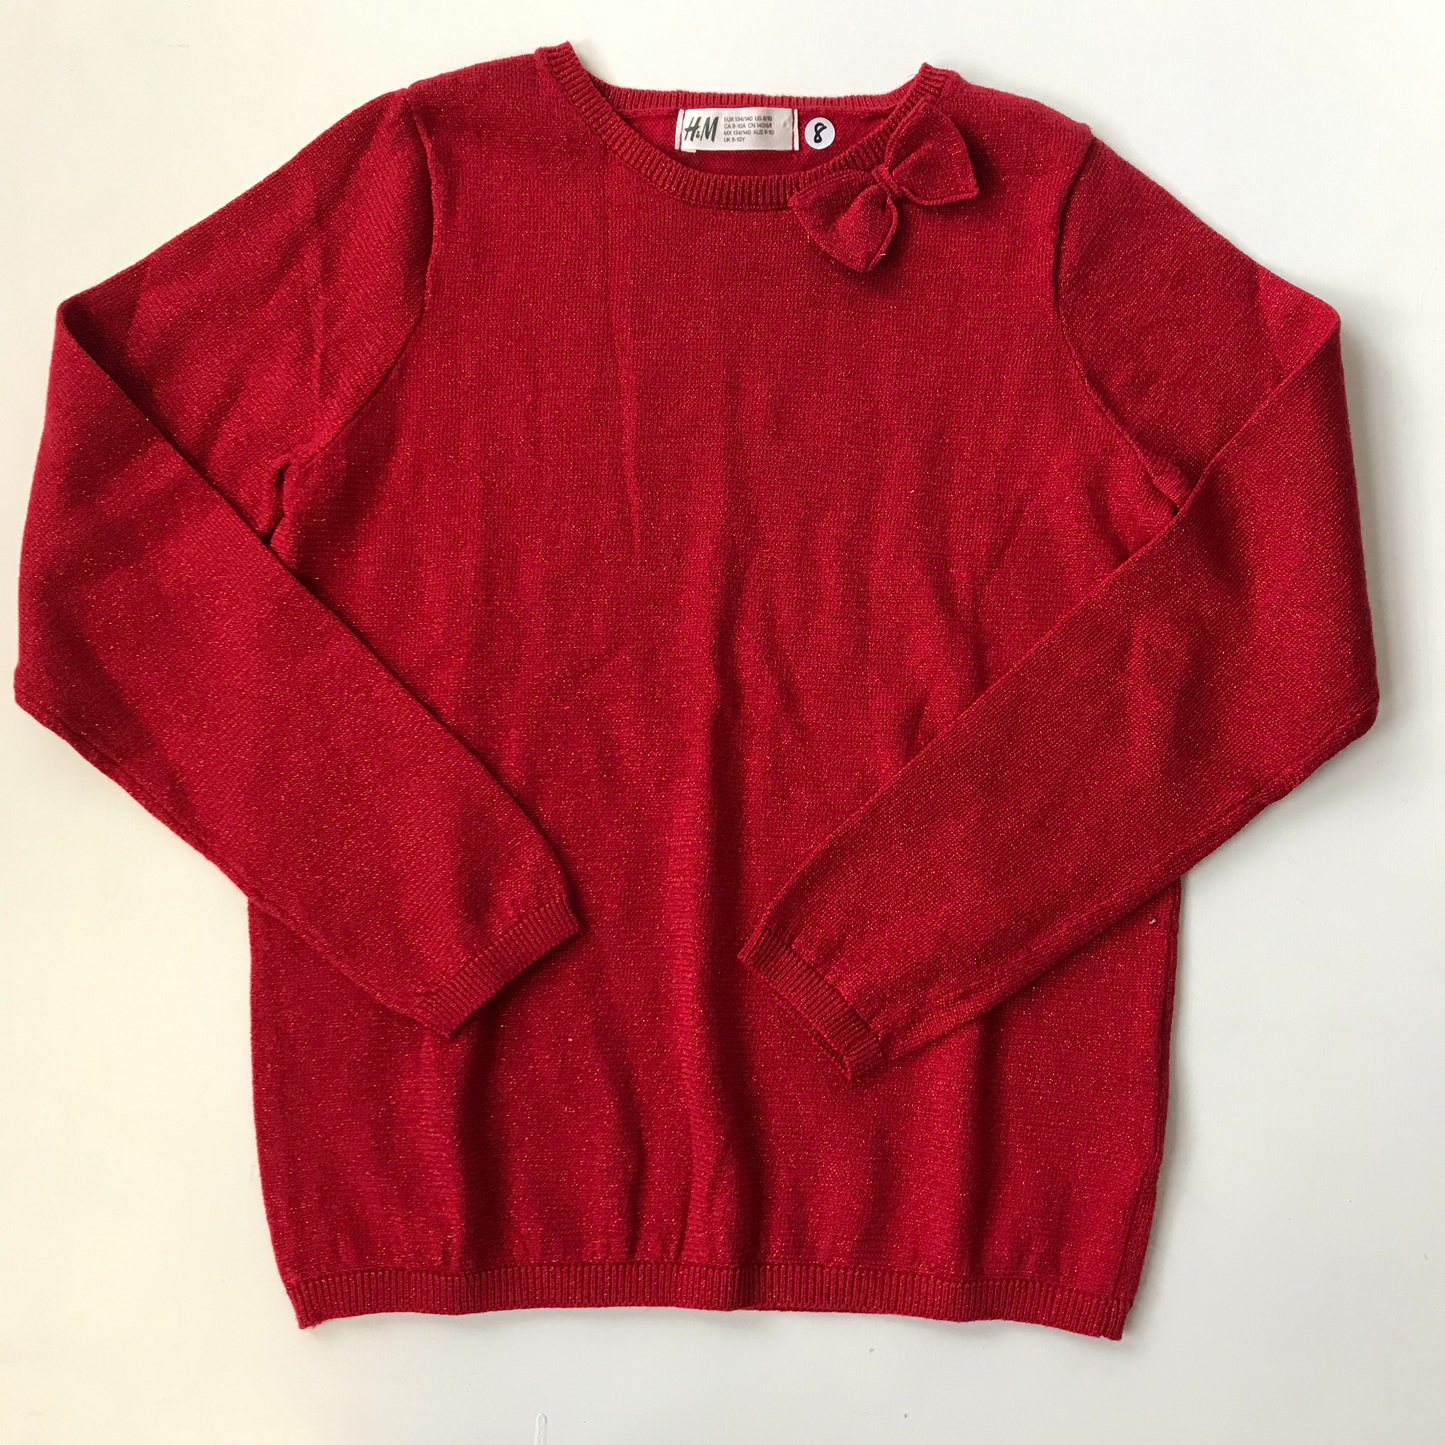 Jumper - Red with Bow - Age 8